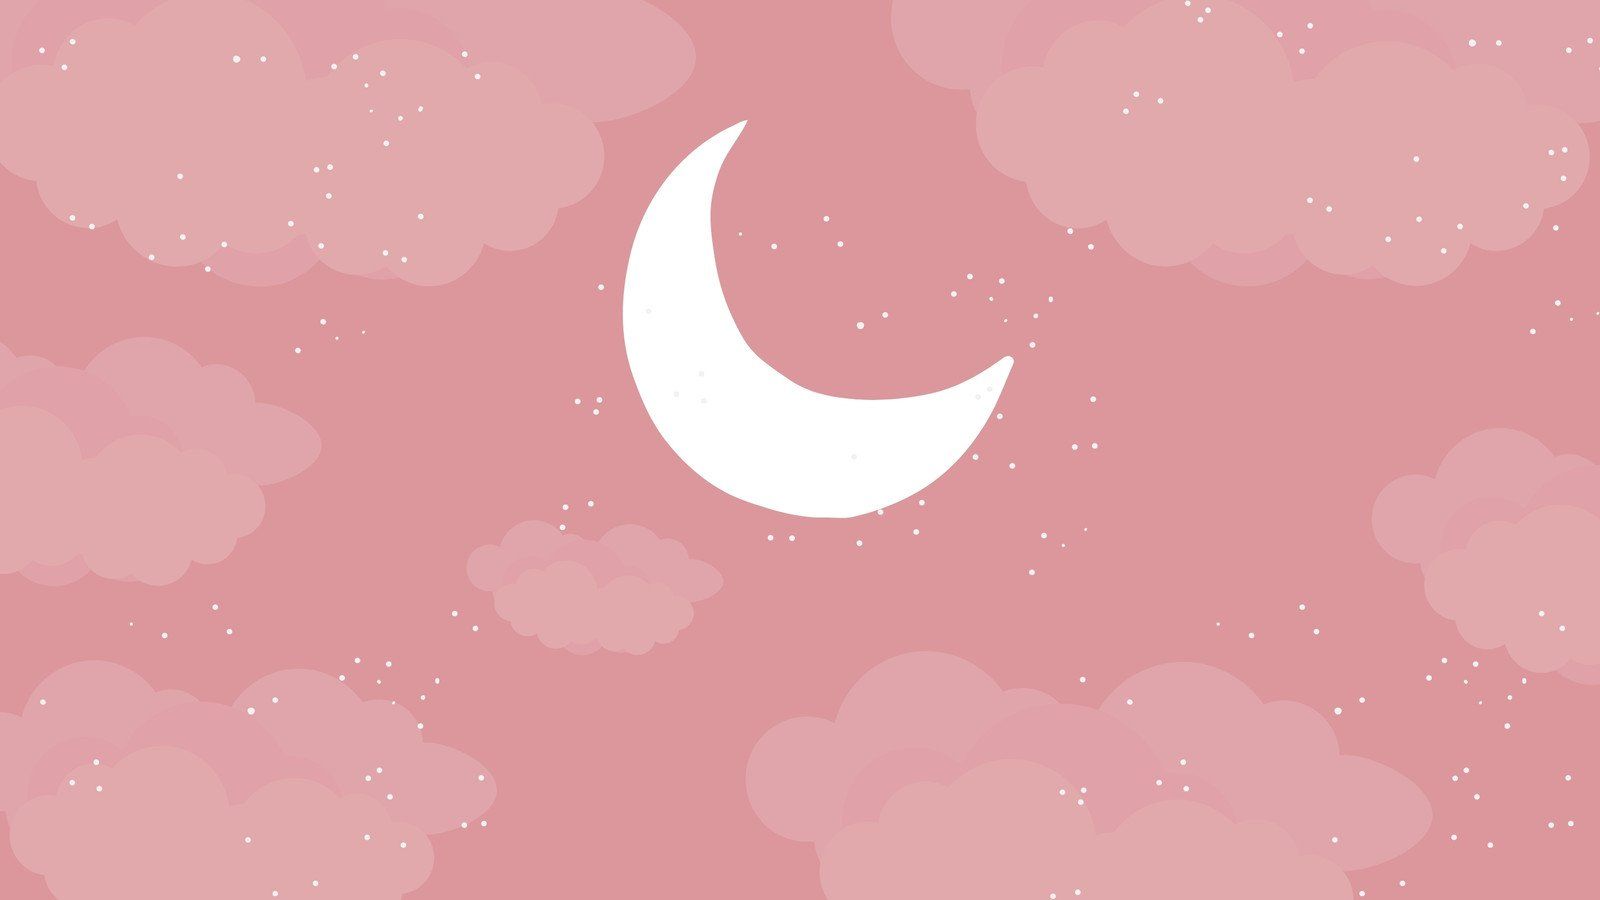 A white crescent moon on a pink background - Desktop, magic, moon, warm, eclipse, YouTube